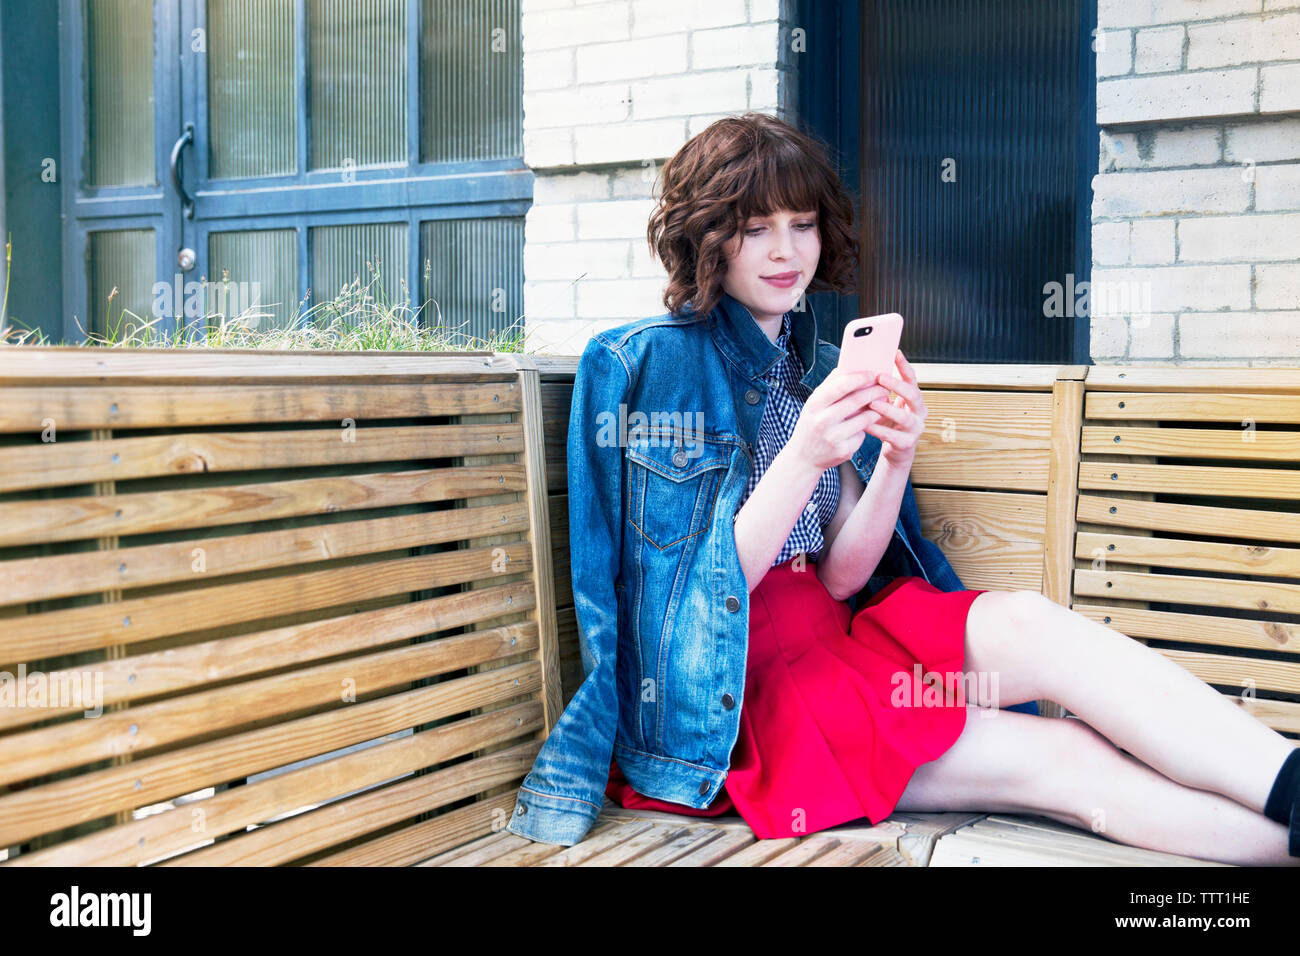 Woman using smart phone while sitting on bench against wall Stock Photo